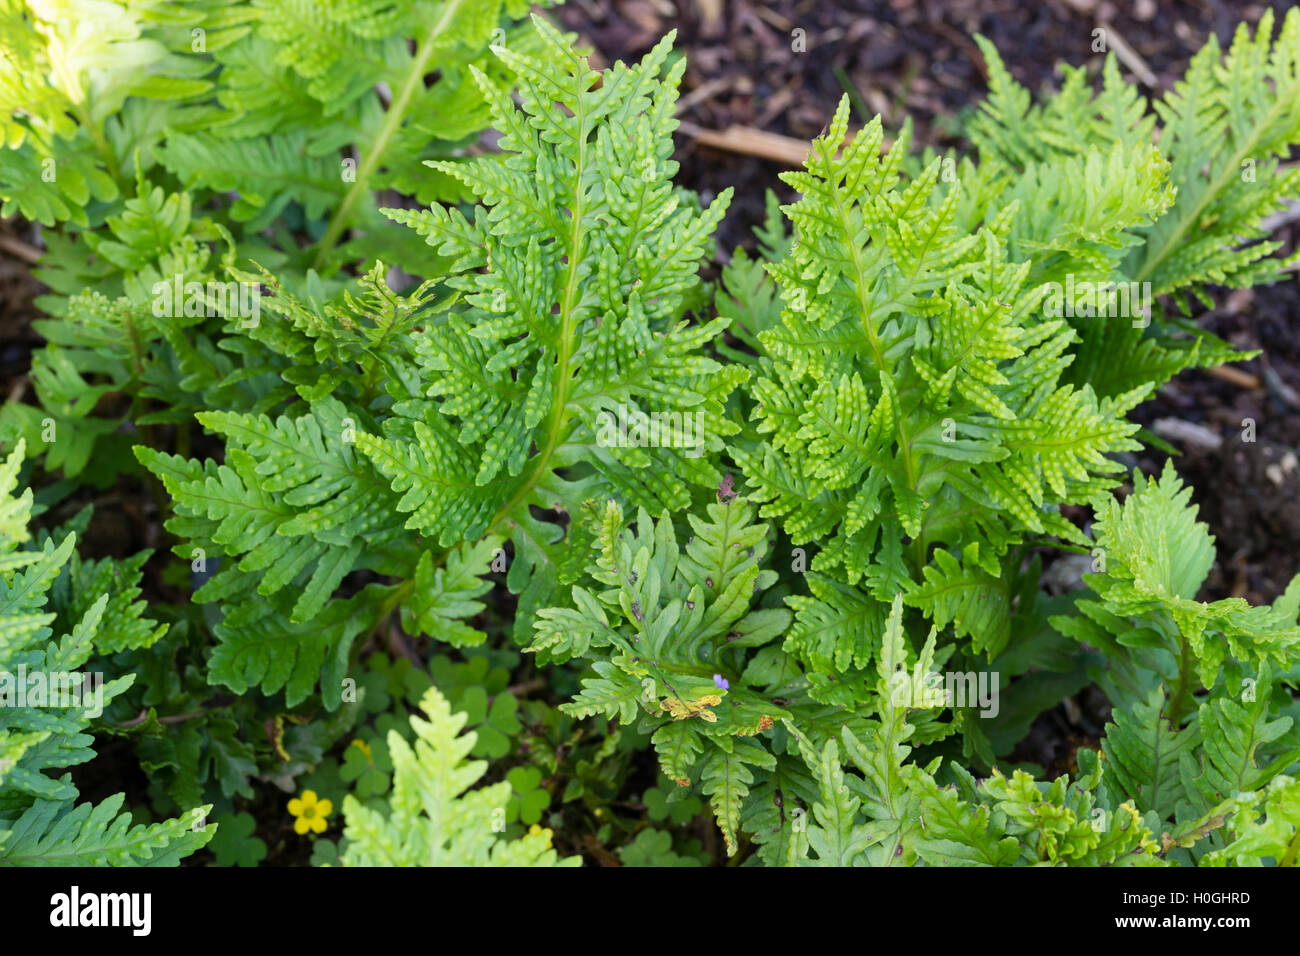 Finely divided fronds of the selected form of the Southern polypody fern, Polypodium cambricum 'Pulcherrimum Trippitt' Stock Photo